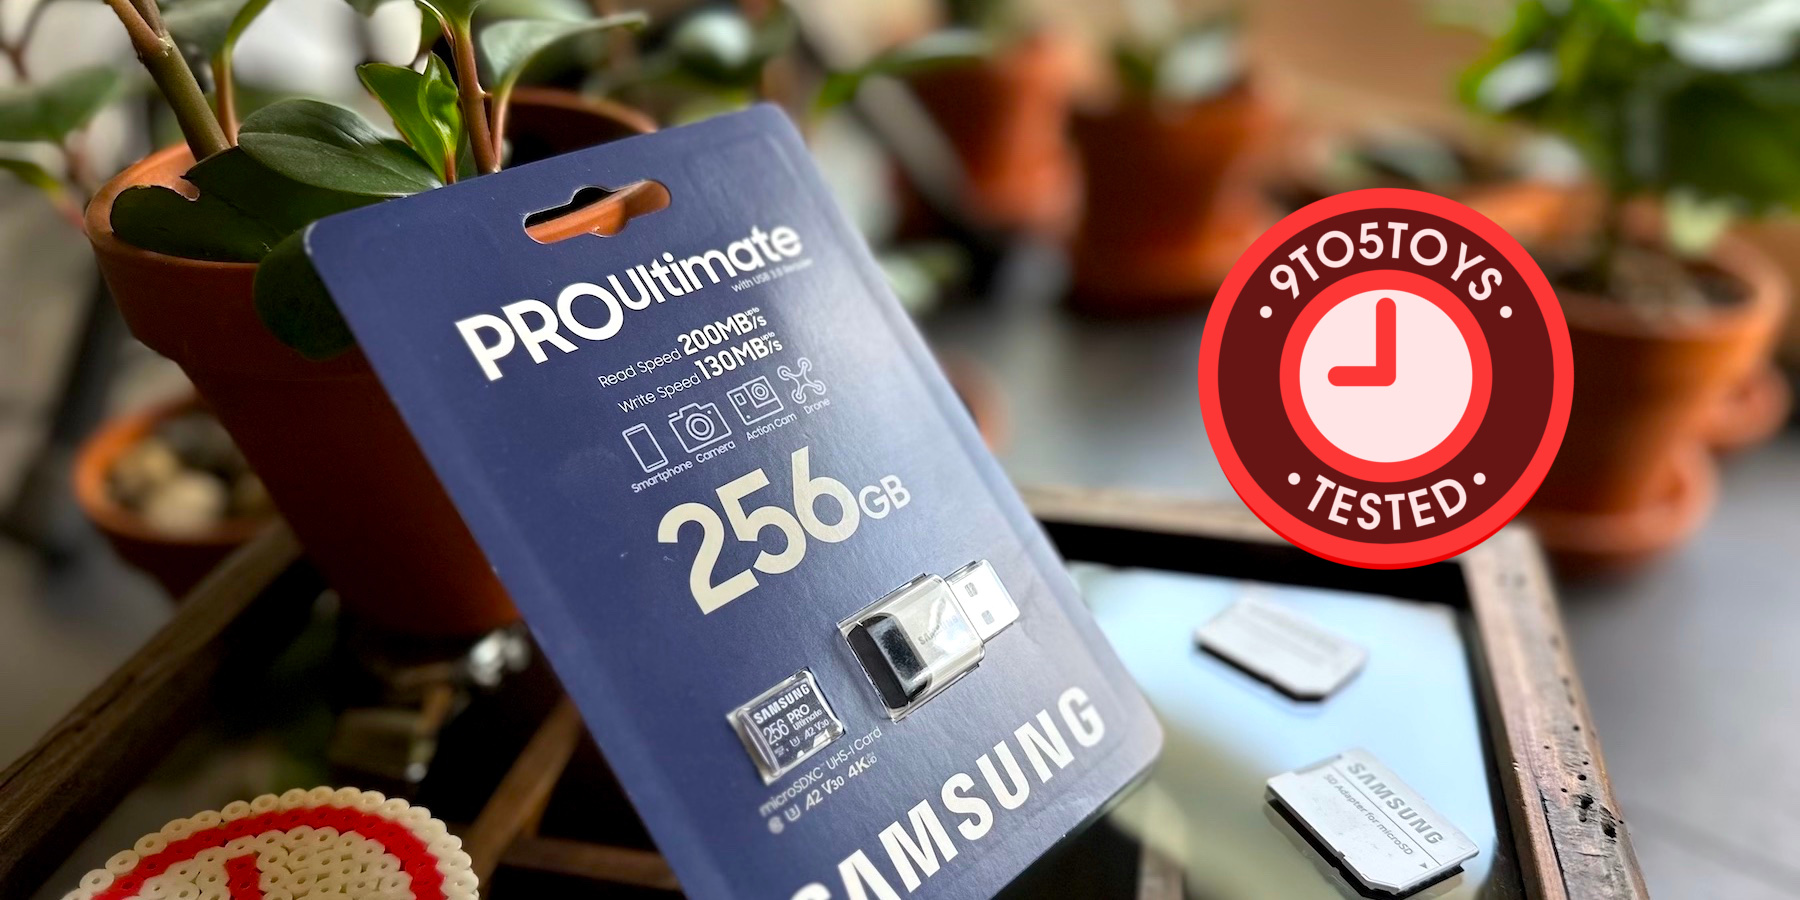 Review: The new Samsung PRO Ultimate microSD cards